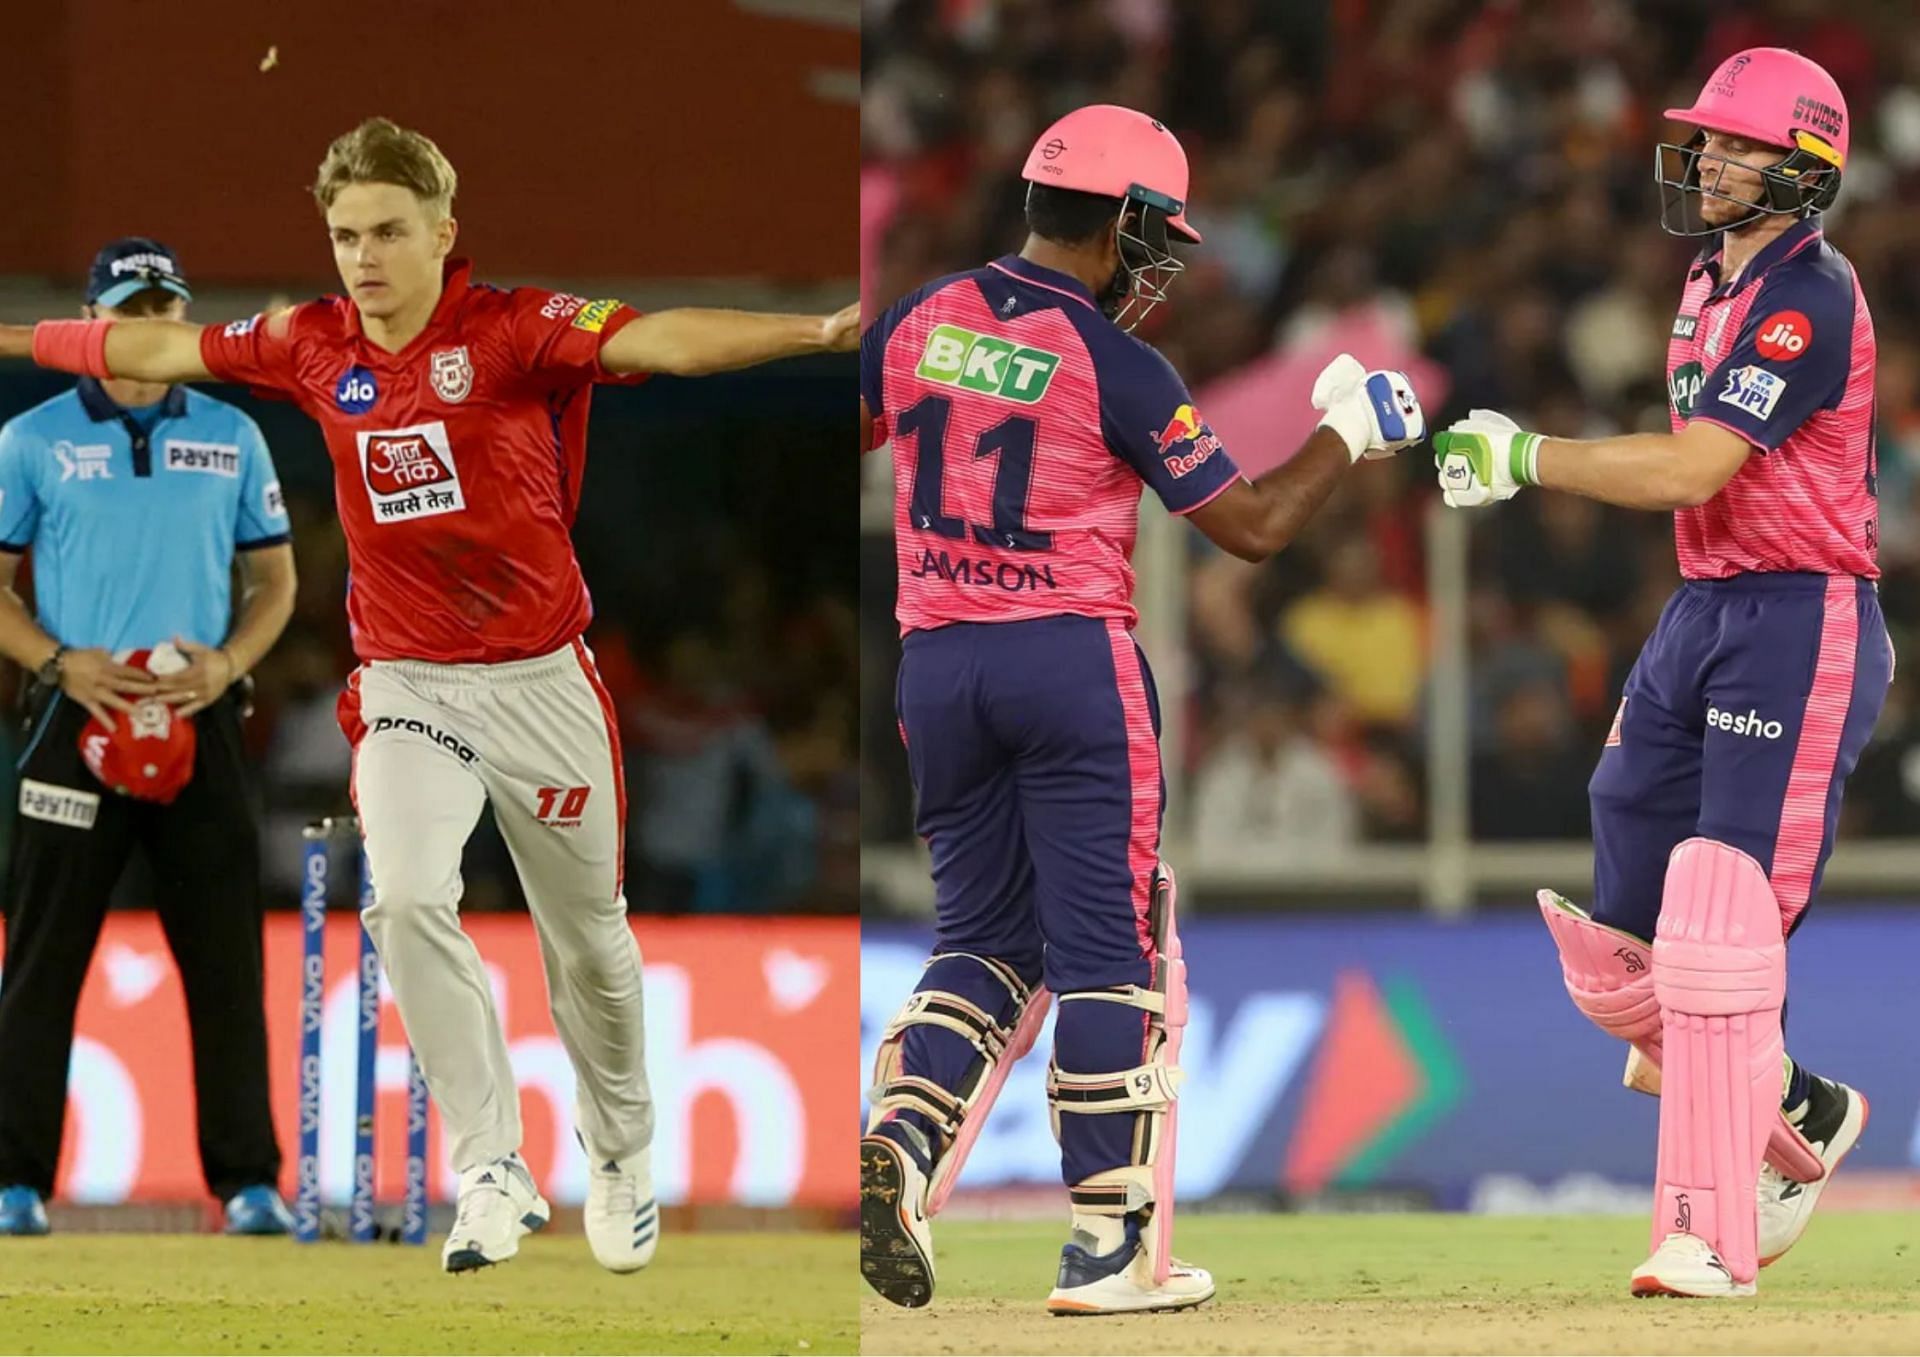 Sam Curran, Sanju Samson and Jos Buttler - bona fide superstars in their own right (Picture Credits: IPL).